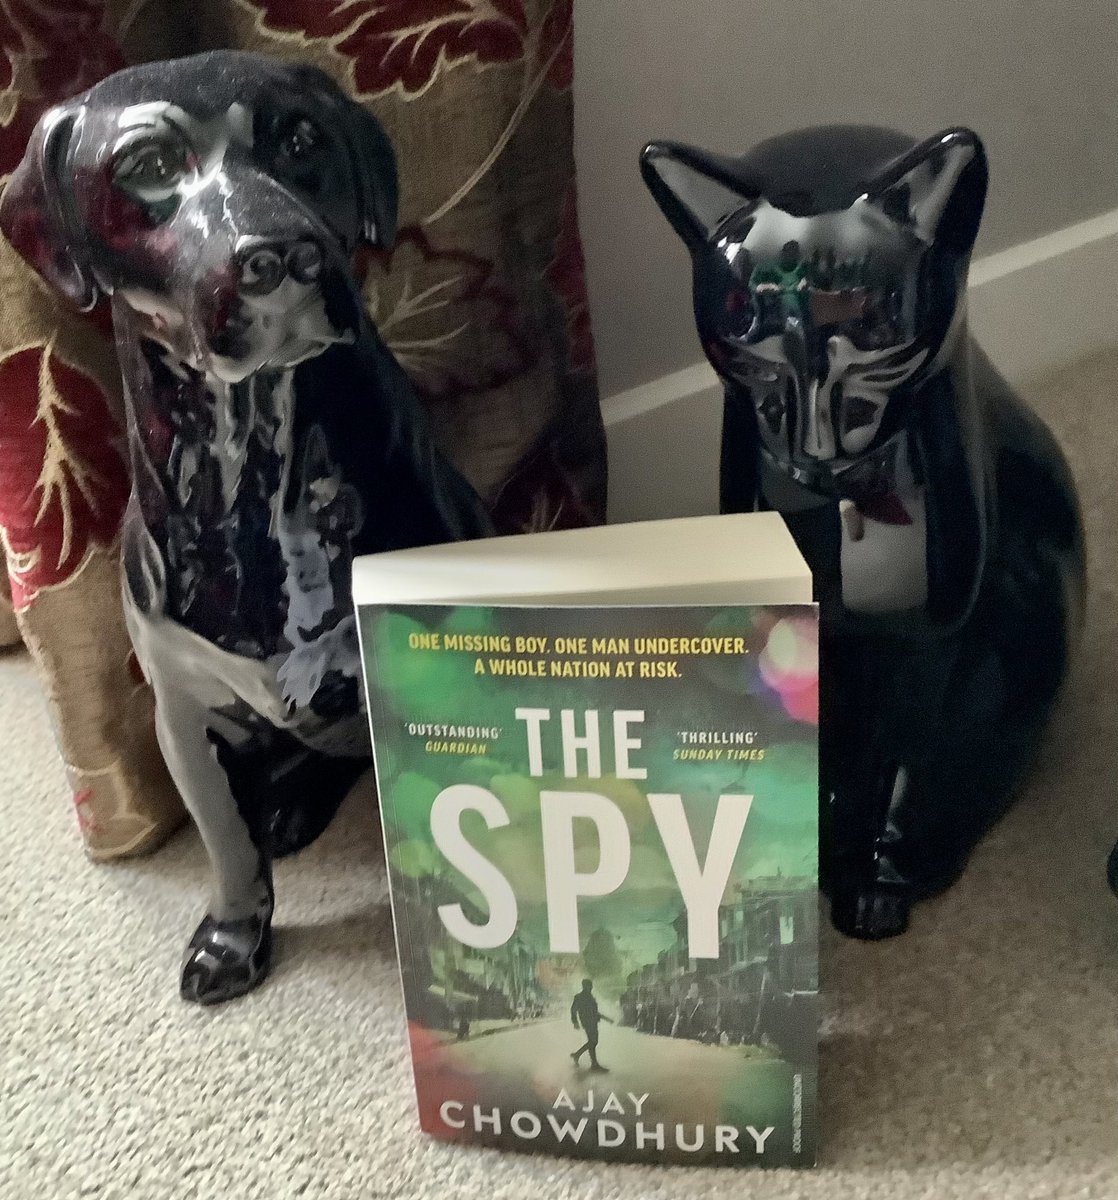 📮📮BOOK POST📮📮 Many thanks to Amelia @penguinrandom @HarvillSecker @vintagebooks for this fabulous proof copy of The Spy by @ajaychow I’m really enjoying this series. If you haven’t already go check them out. The Spy is available now.